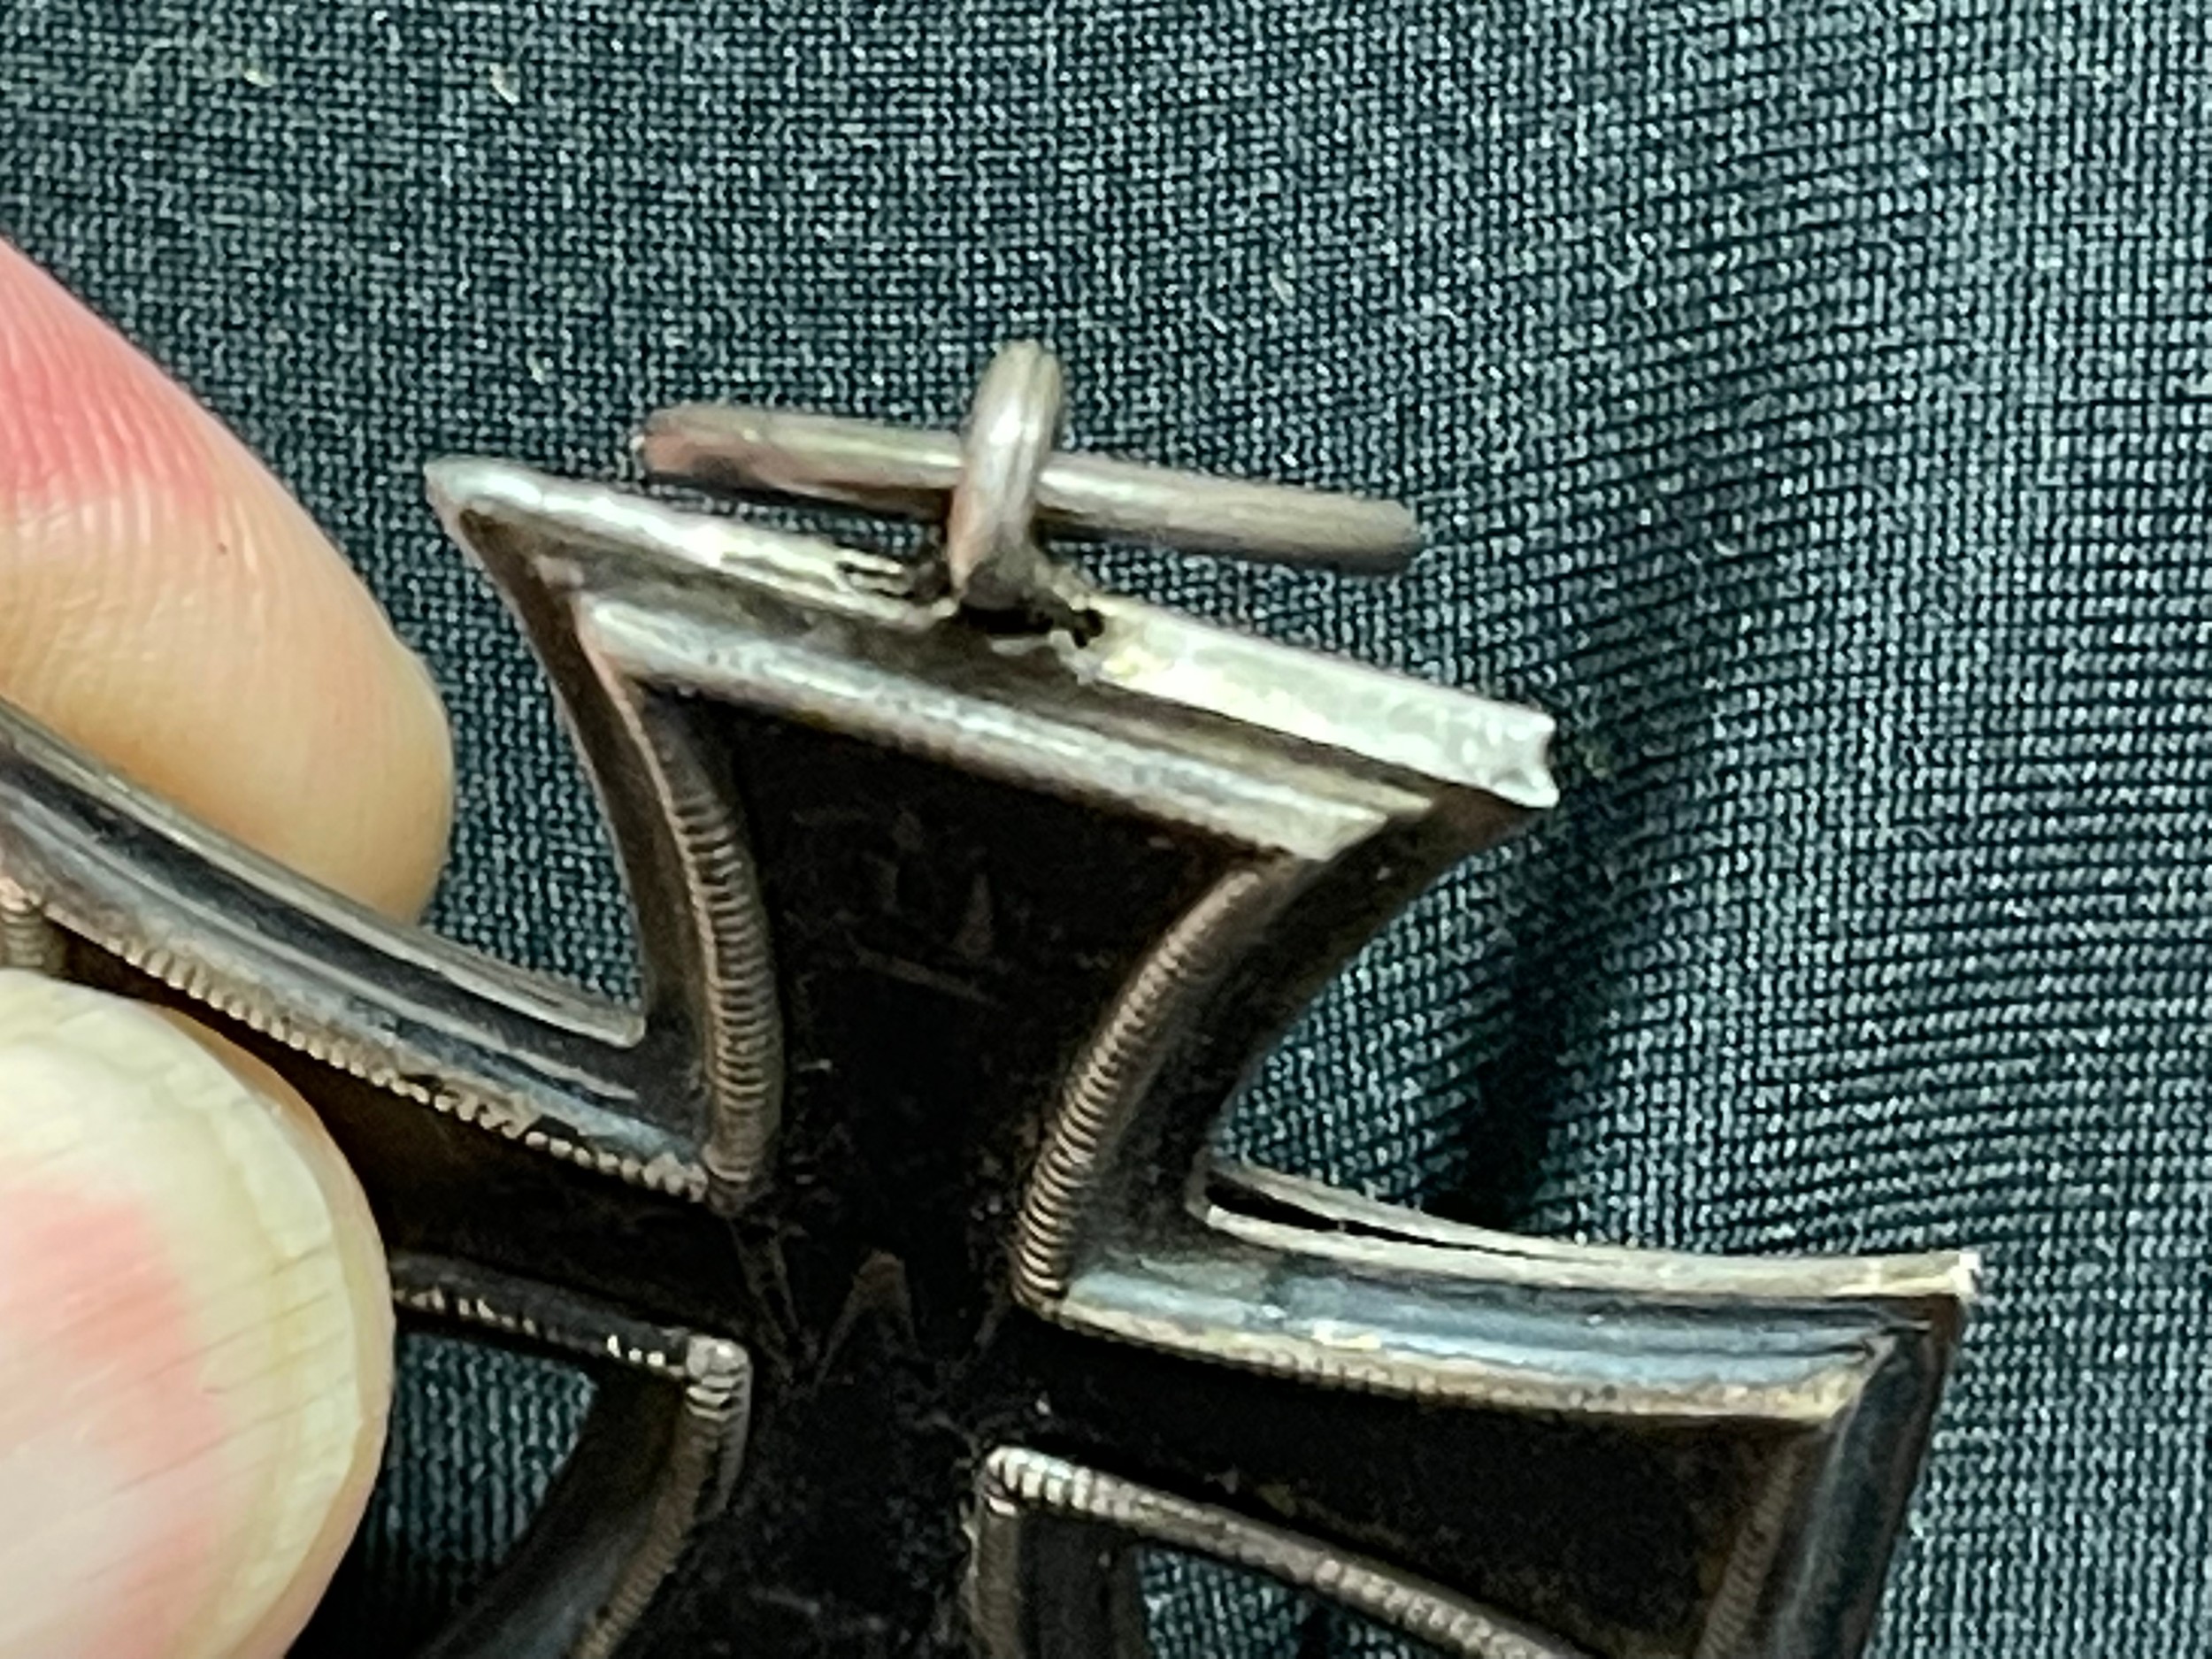 WW1 Imperial German Iron Cross 2nd class 1914. Maker marked to ring "KO". No ribbon. - Image 4 of 6